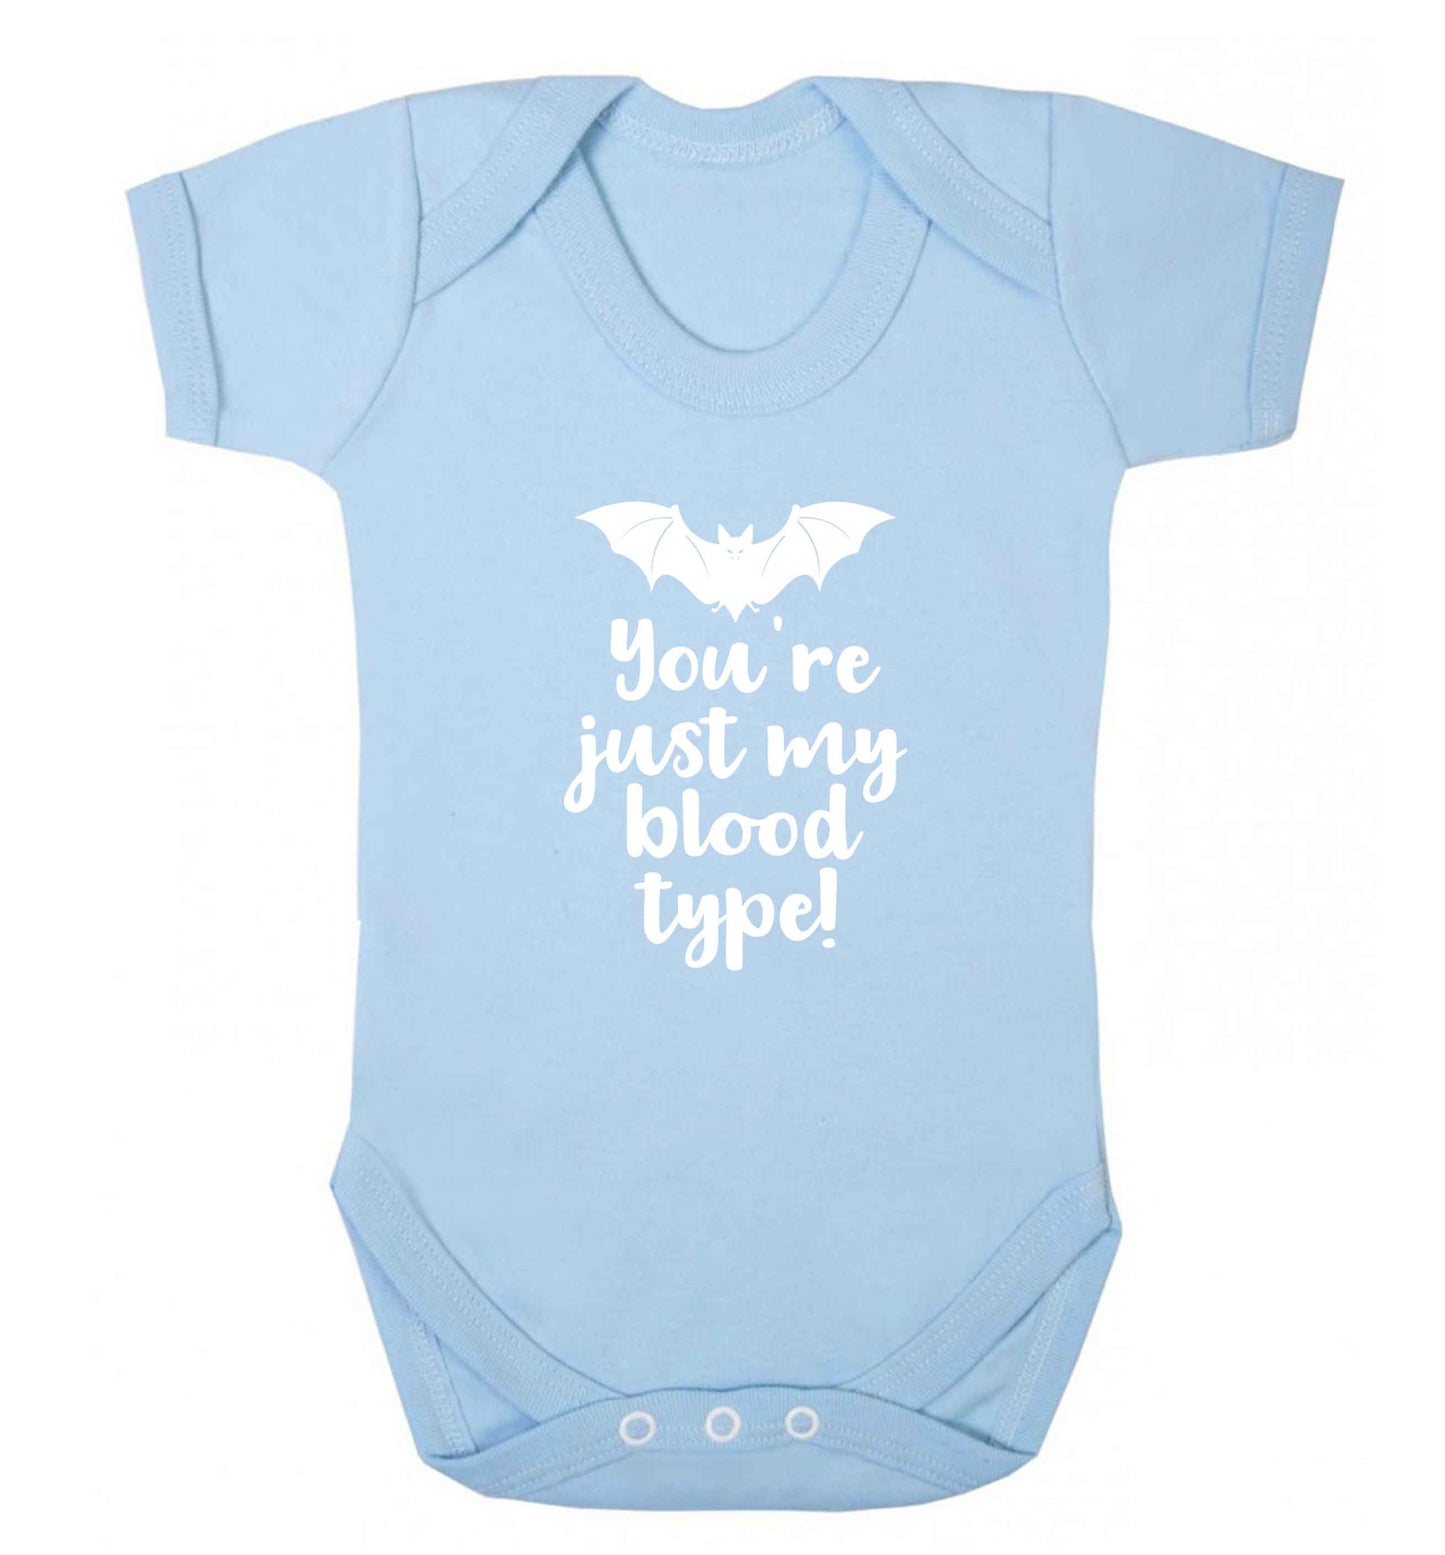 You're just my blood type baby vest pale blue 18-24 months